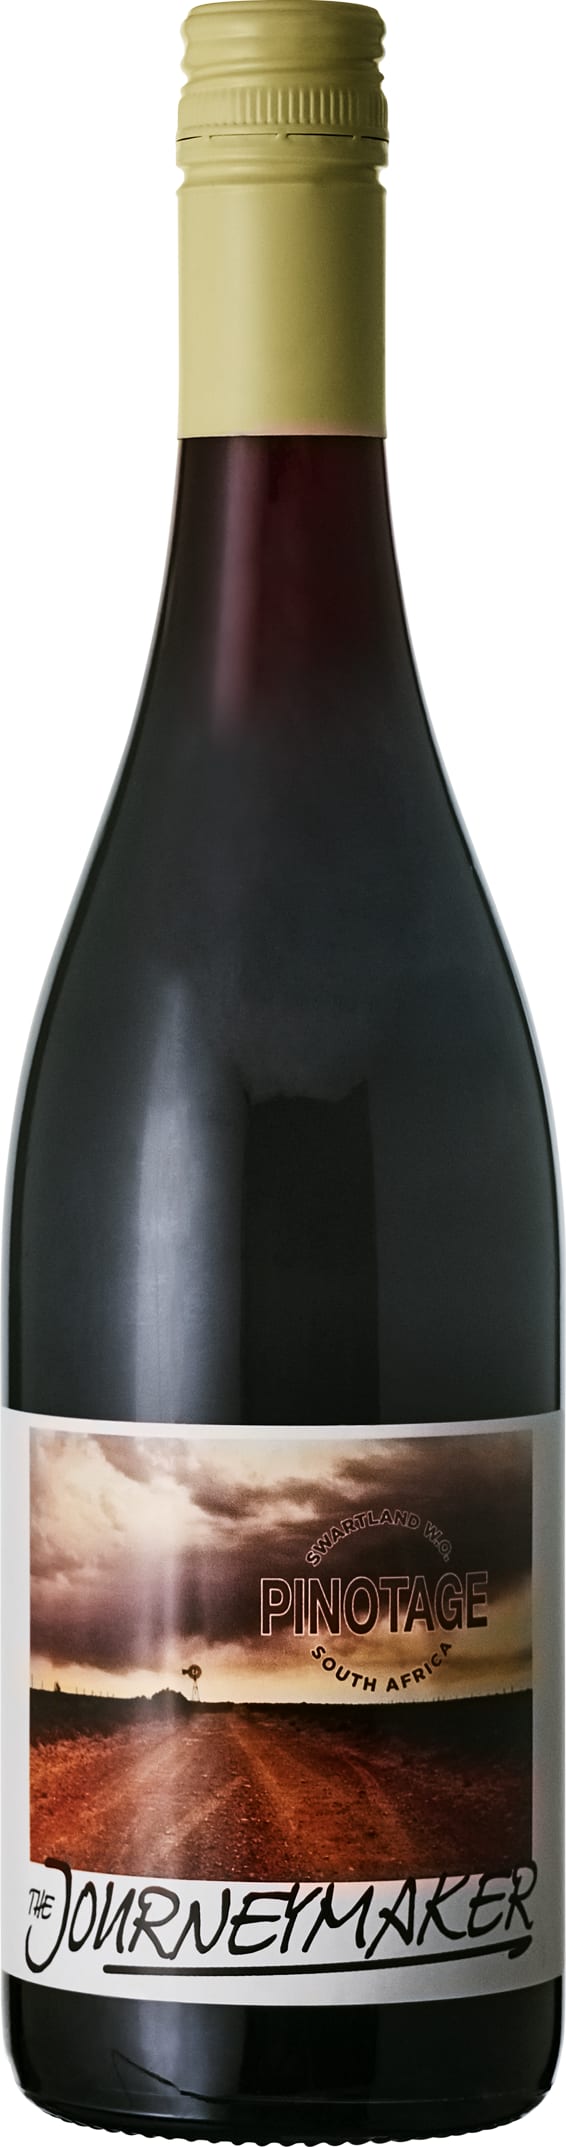 Pinotage 17 Journeymaker 75cl - Buy Journeymaker Wines from GREAT WINES DIRECT wine shop